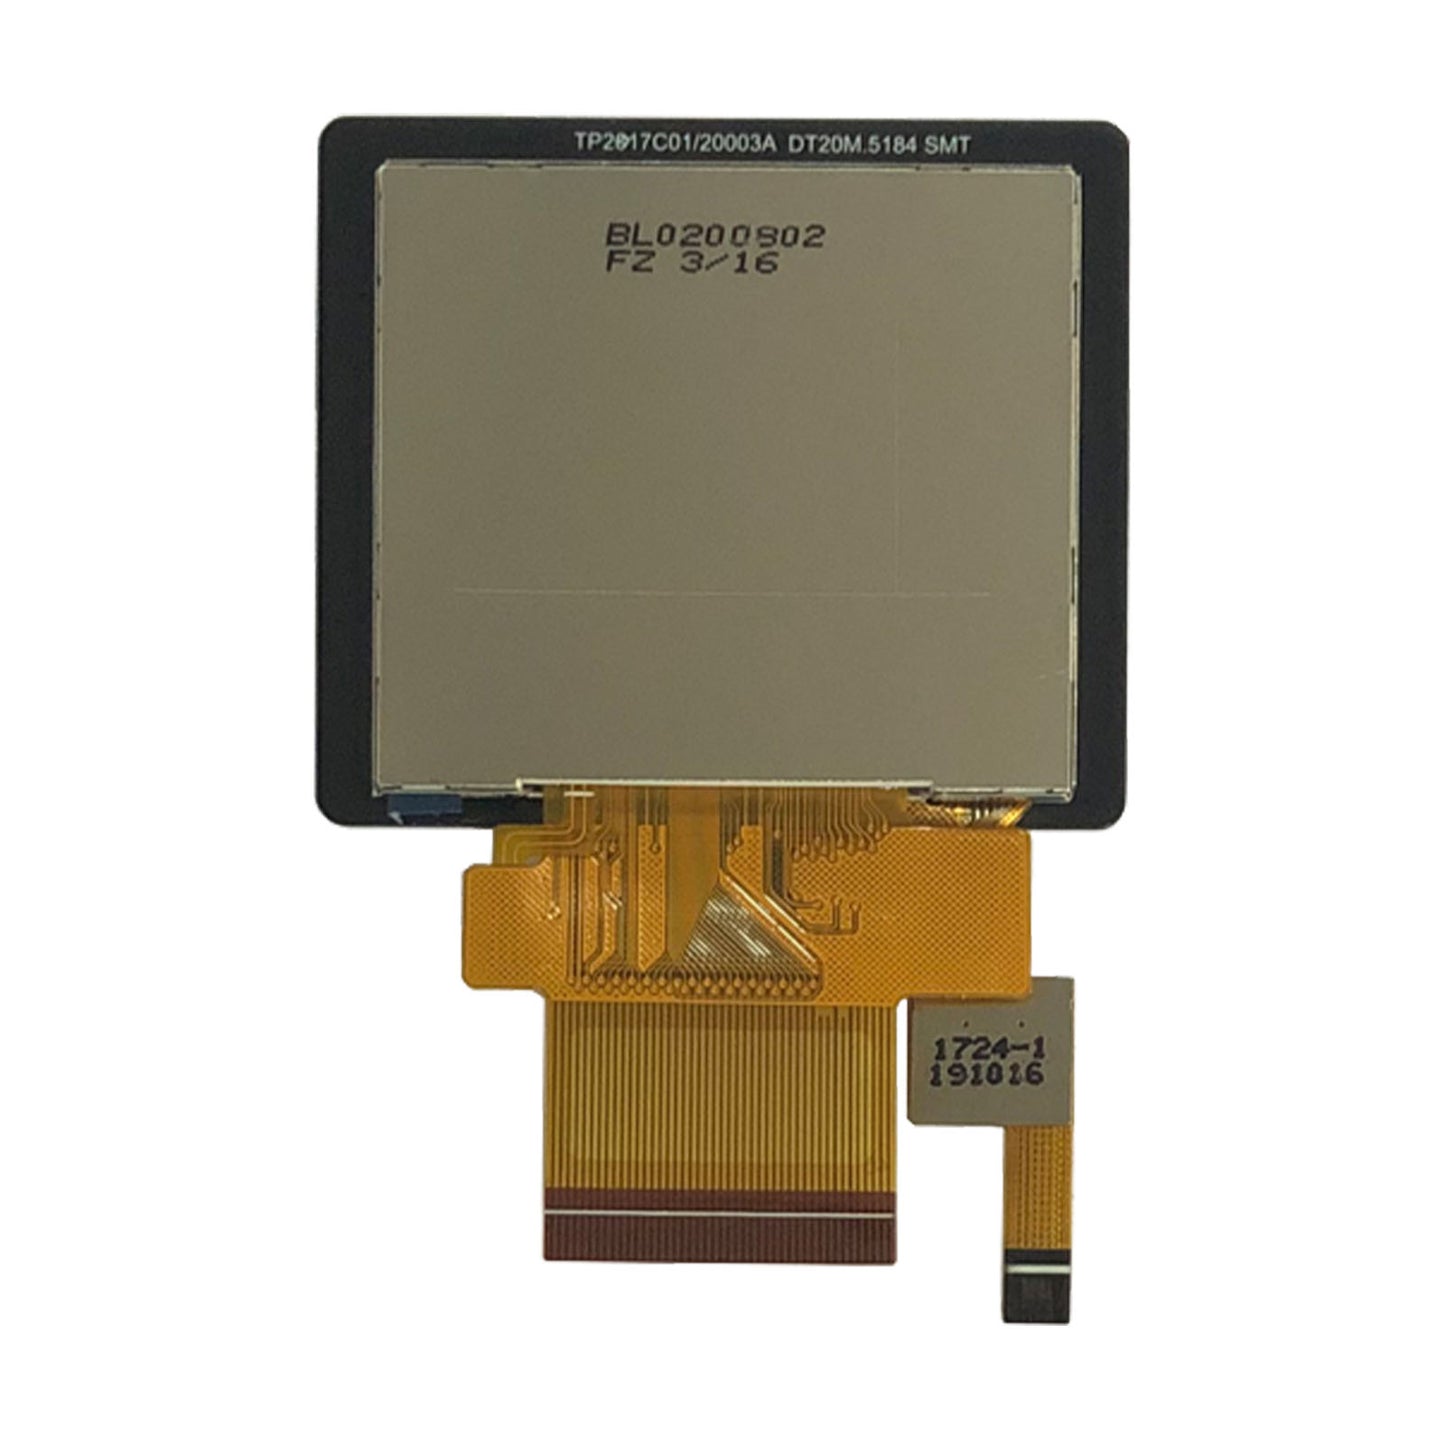 back of 2.0 inch 320x240 TFT transflective display with capacitive touch, MCU, SPI, and RGB interfaces